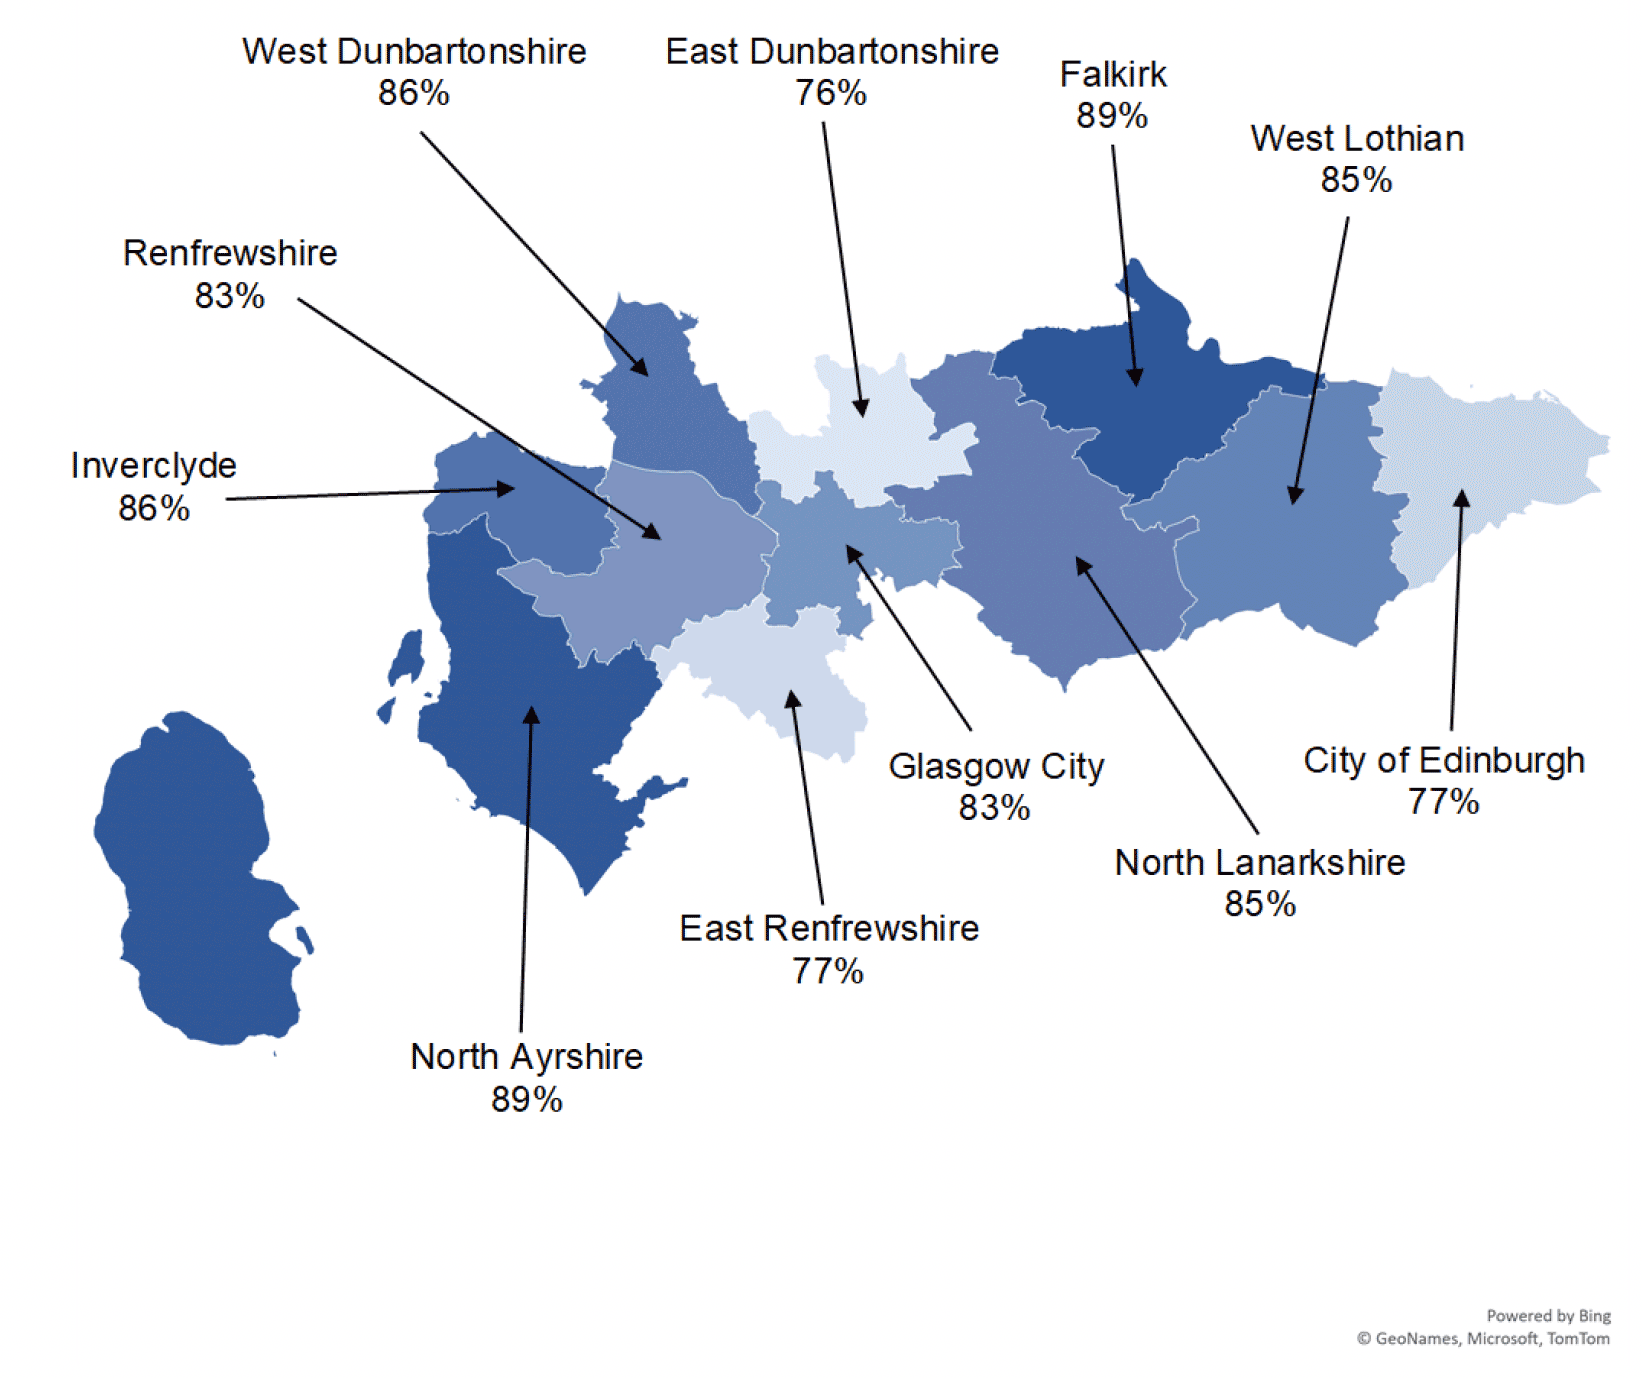 A map showing the take-up rate of Scottish Child Payment by local authority across Central Scotland, as of March 2023. Inverclyde: 86%, Renfrewshire: 83%, North Ayrshire: 89%, West Dunbartonshire: 86%, East Renfrewshire: 77%, EastDunbartonshire: 76%, Glasgow City: 83%, North Lanarkshire: 84%, Falkirk: 89%, West Lothian: 85%, City of Edinburgh: 77%